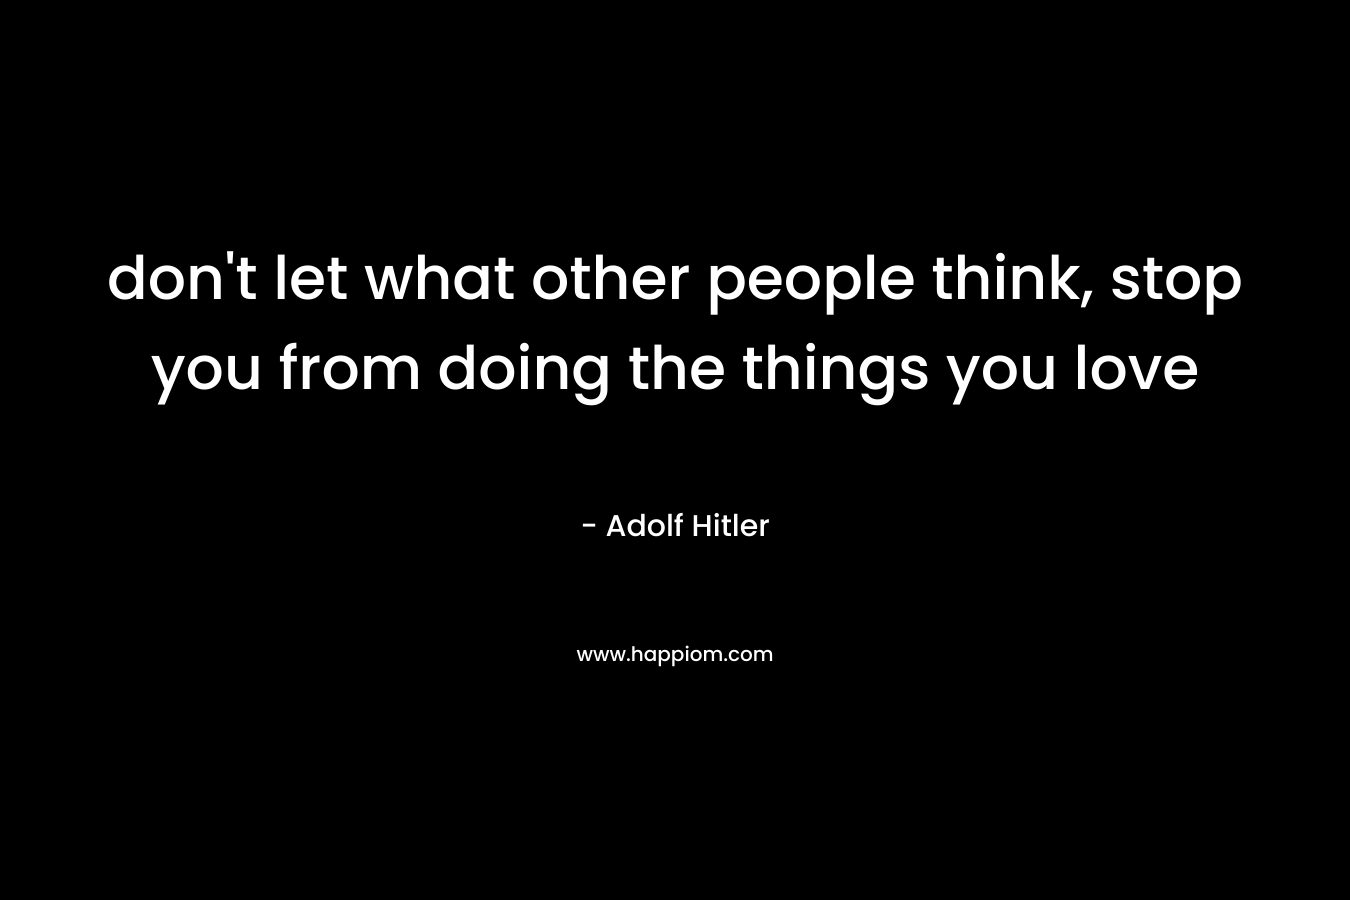 don’t let what other people think, stop you from doing the things you love – Adolf Hitler